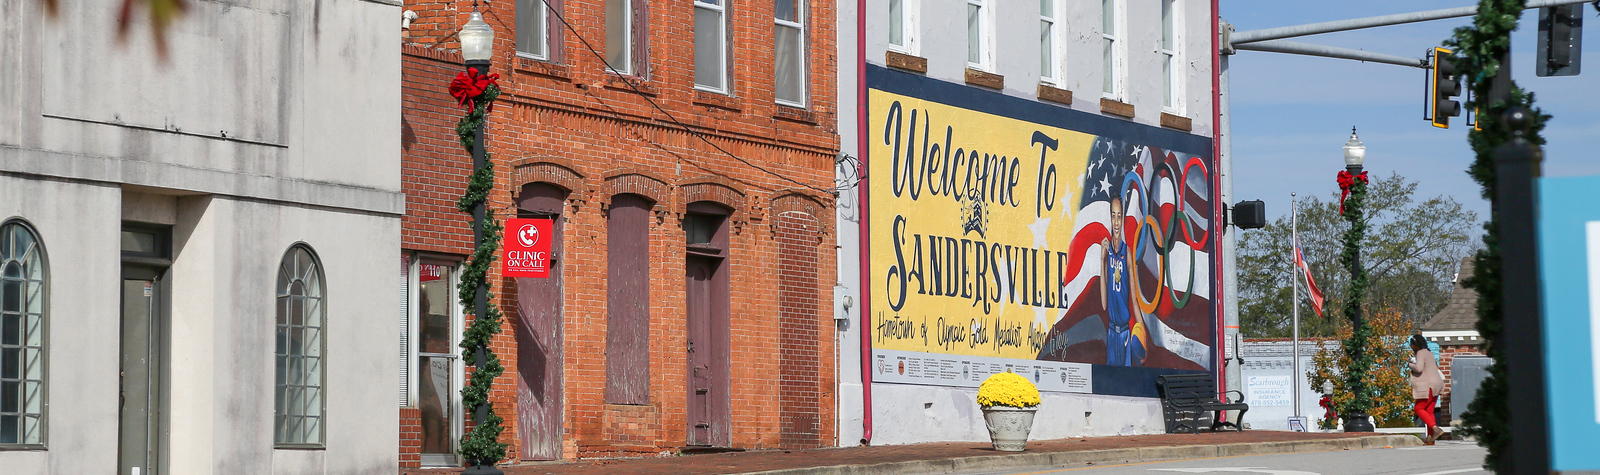 Downtown Sandersville in Washington County, one of this year's ICLI recipients